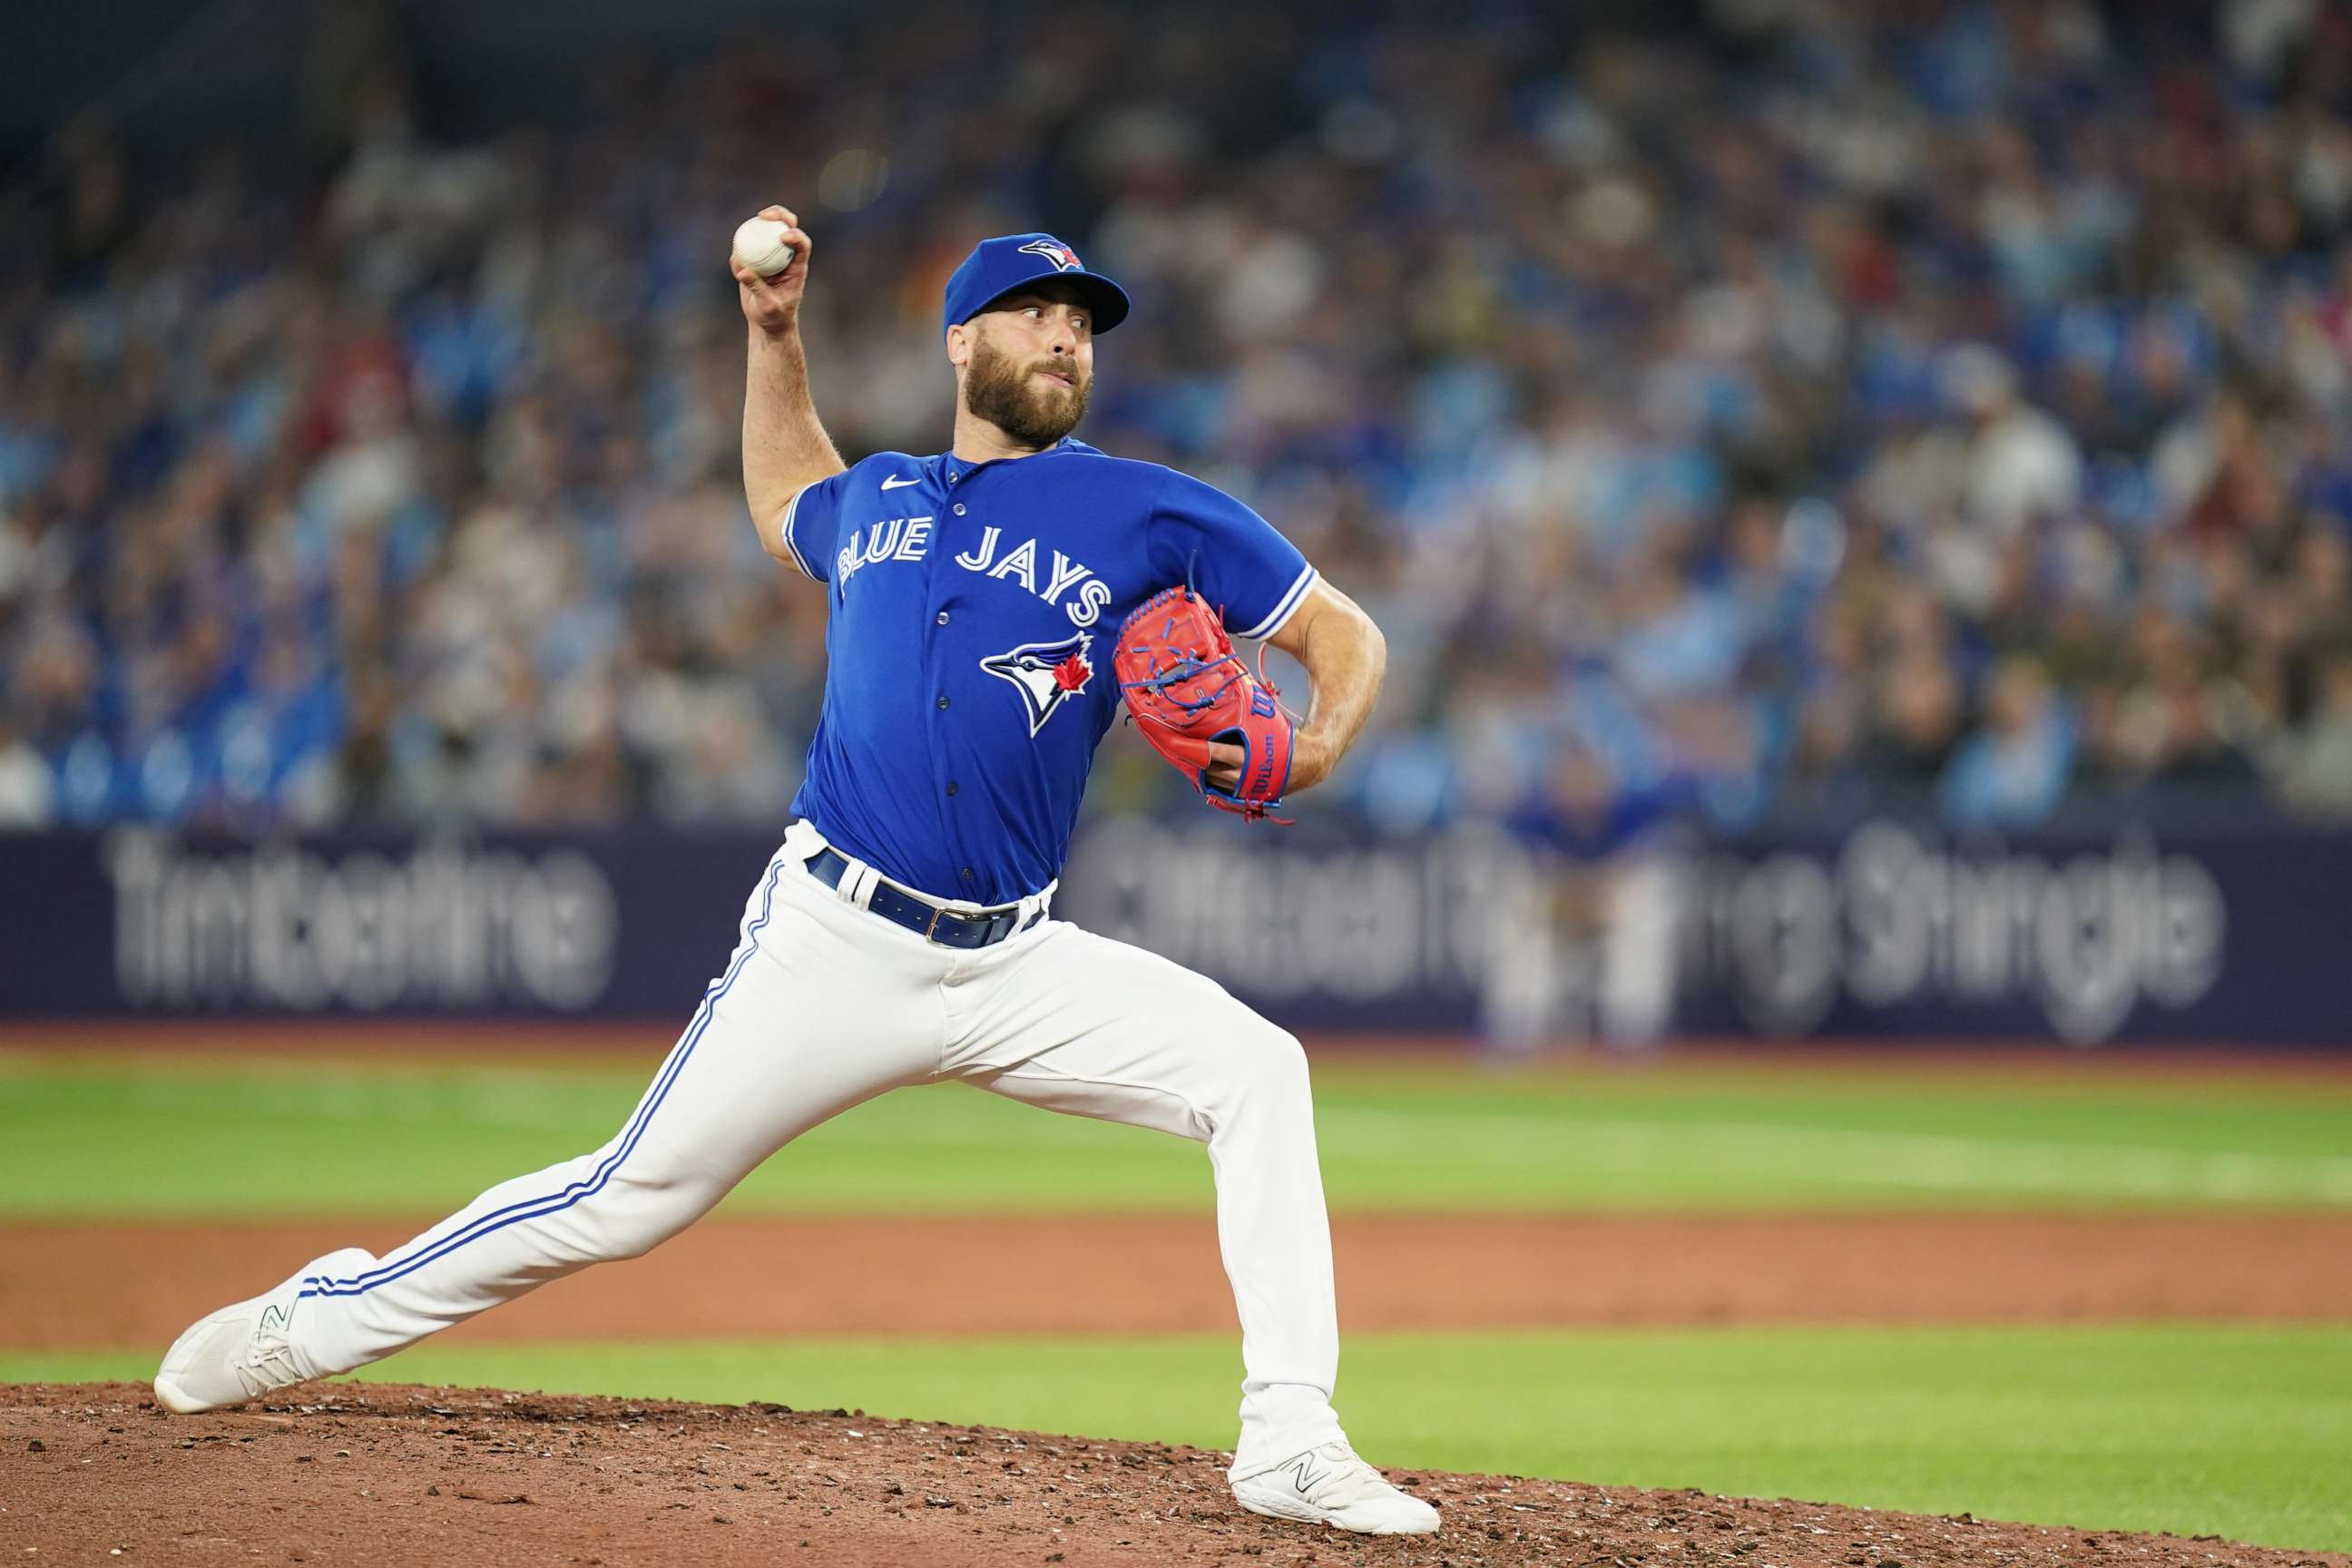 PHOTO: Anthony Bass of the Toronto Blue Jays pitches during a game Apr. 11, 2023 in Toronto, Canada.